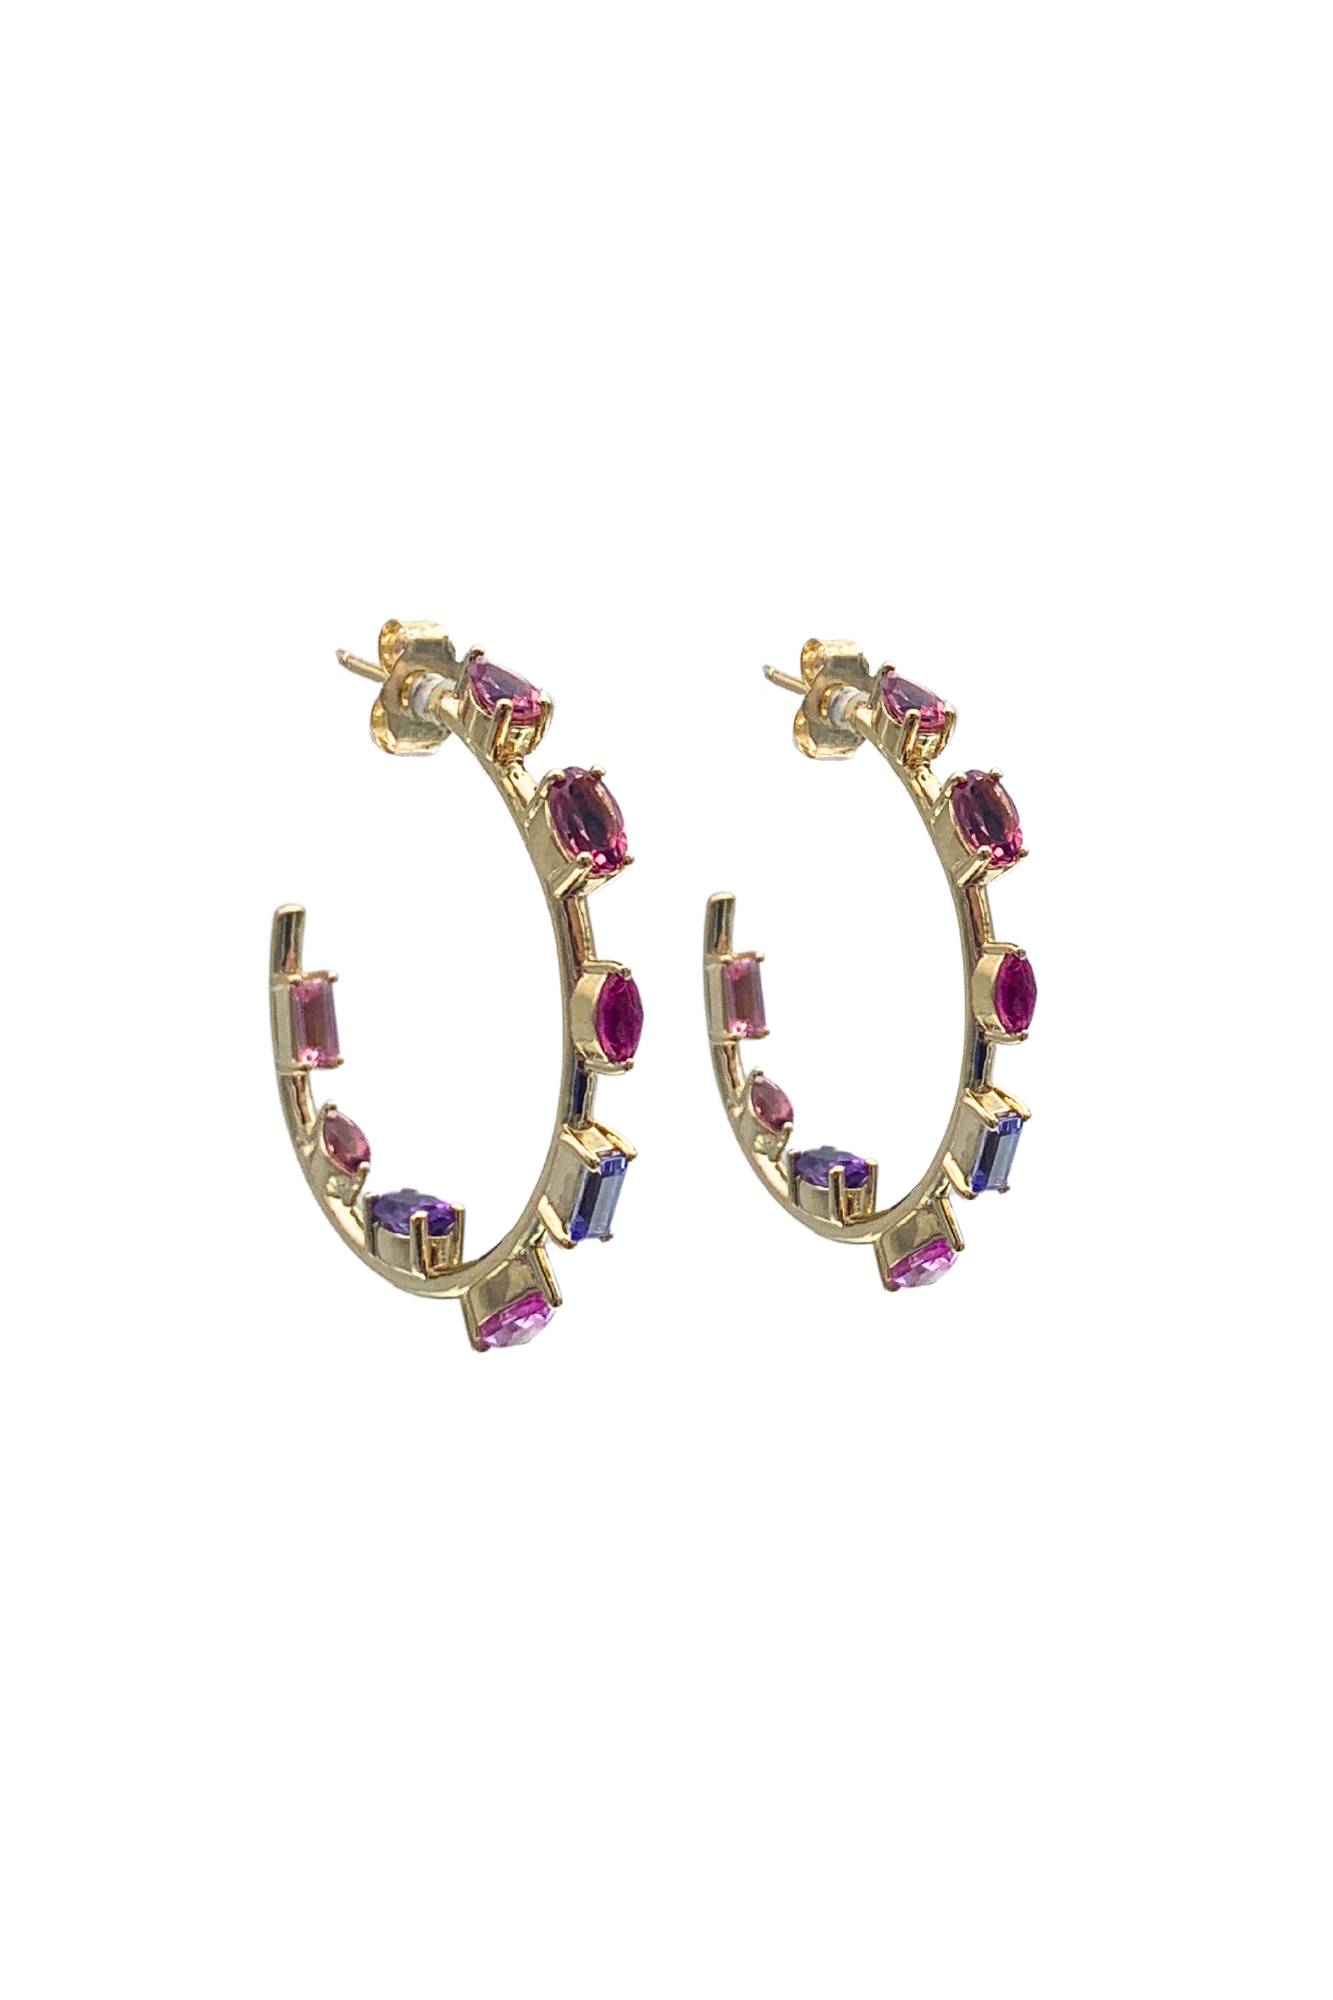 Subtle, the Mini Goddess Hoops come to you from designer Eden Presley. These hoops are carefully crafted from high quality materials,